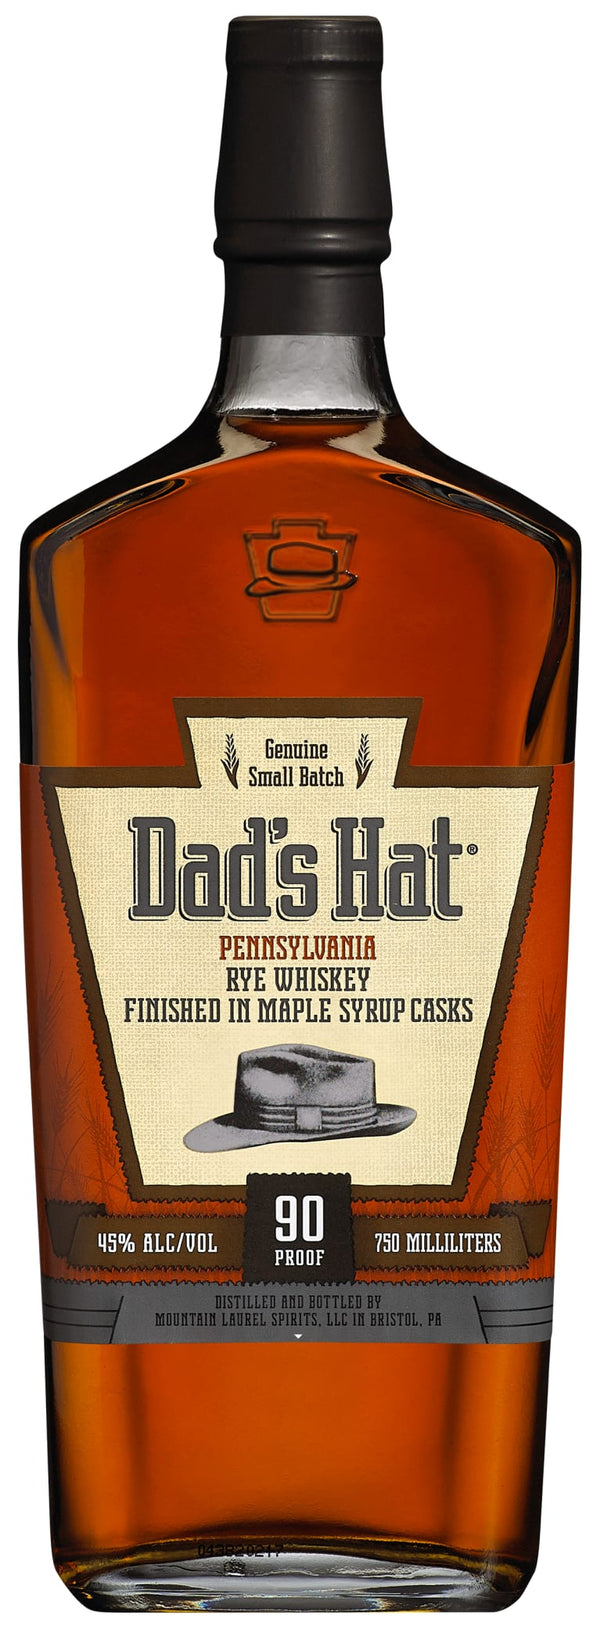 Buy Dad's Hat Pennsylvania Rye Finished In Maple Casks Online -Craft City